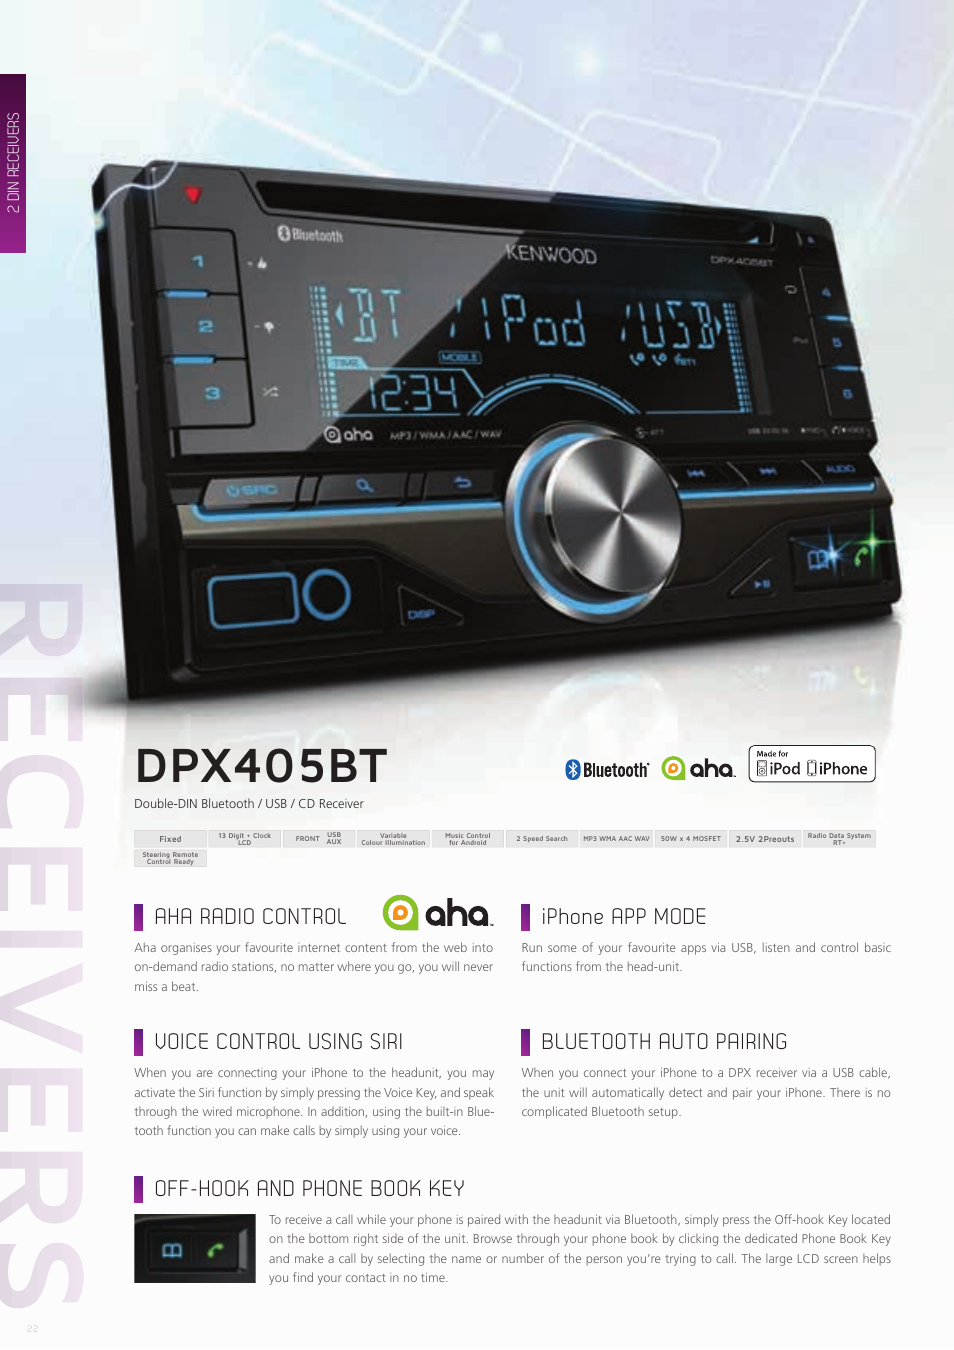 Dpx405bt, Aha radio control iphone app mode, Bluetooth auto pairing |  Kenwood CAW-CKIMVW1 User Manual | Page 22 / 36